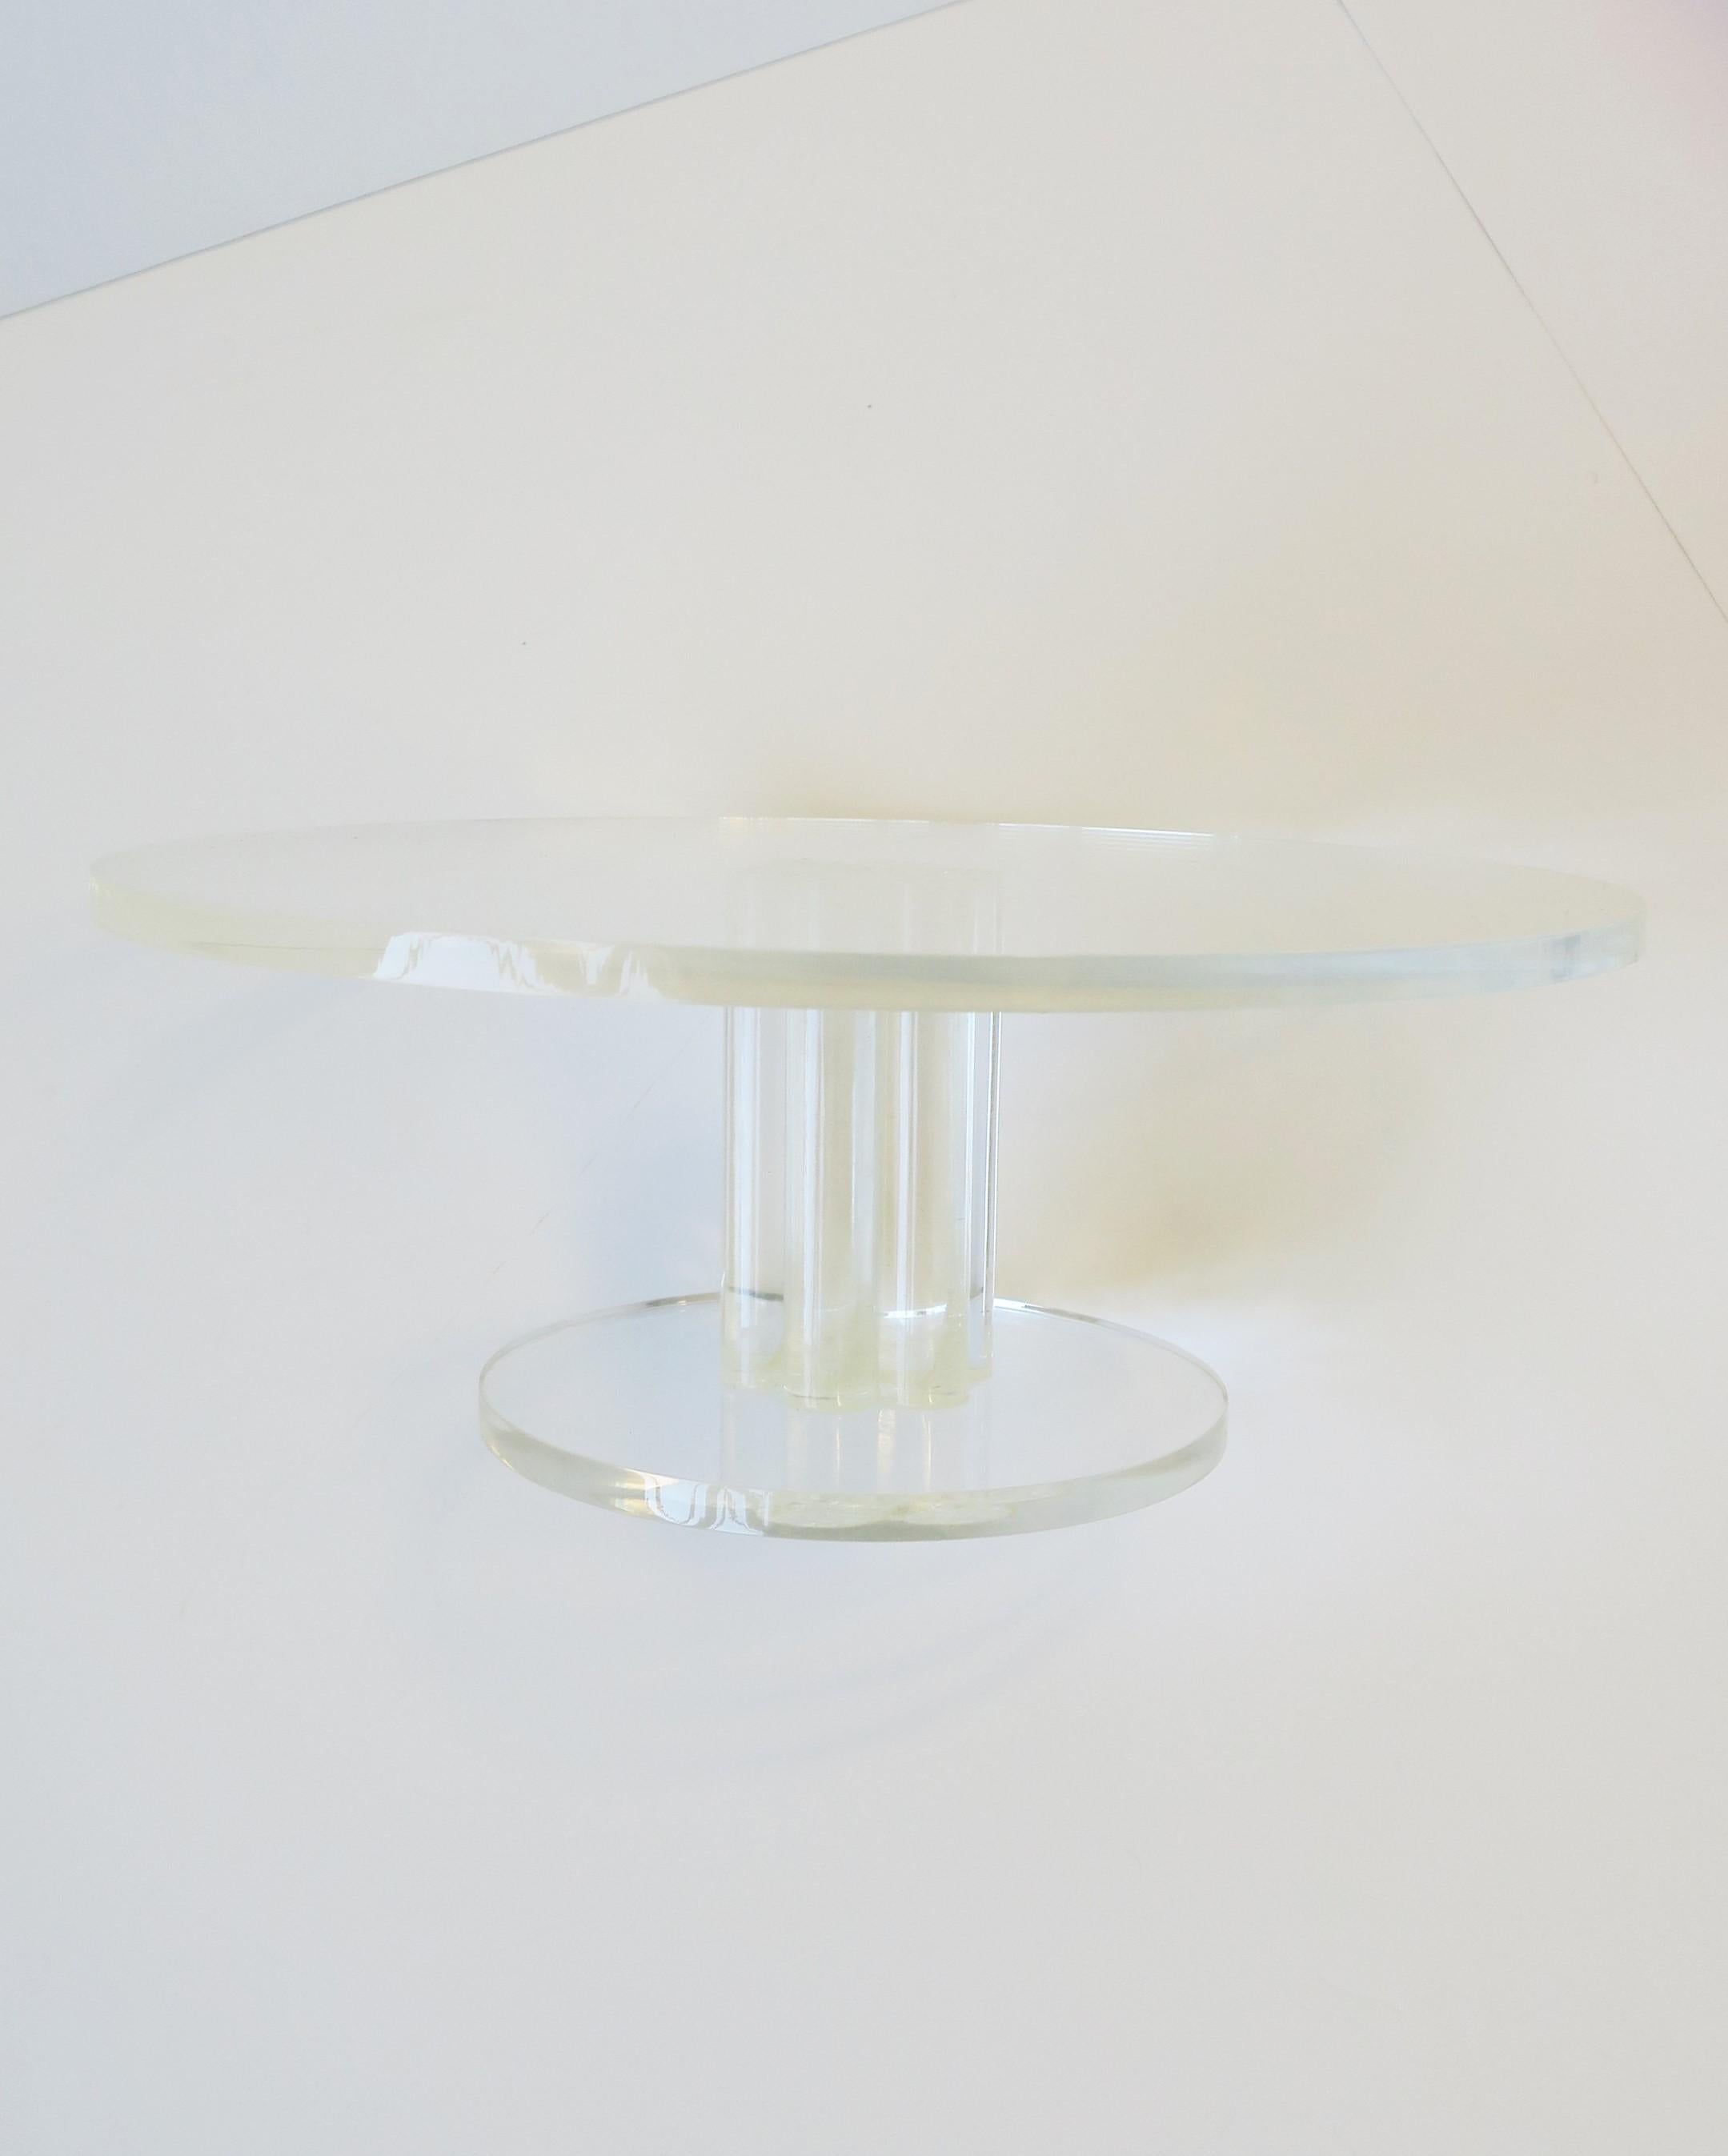 A vintage Modern style Lucite cake or dessert plate pedestal stand, circa late-20th century. 

Dimensions: 4.63